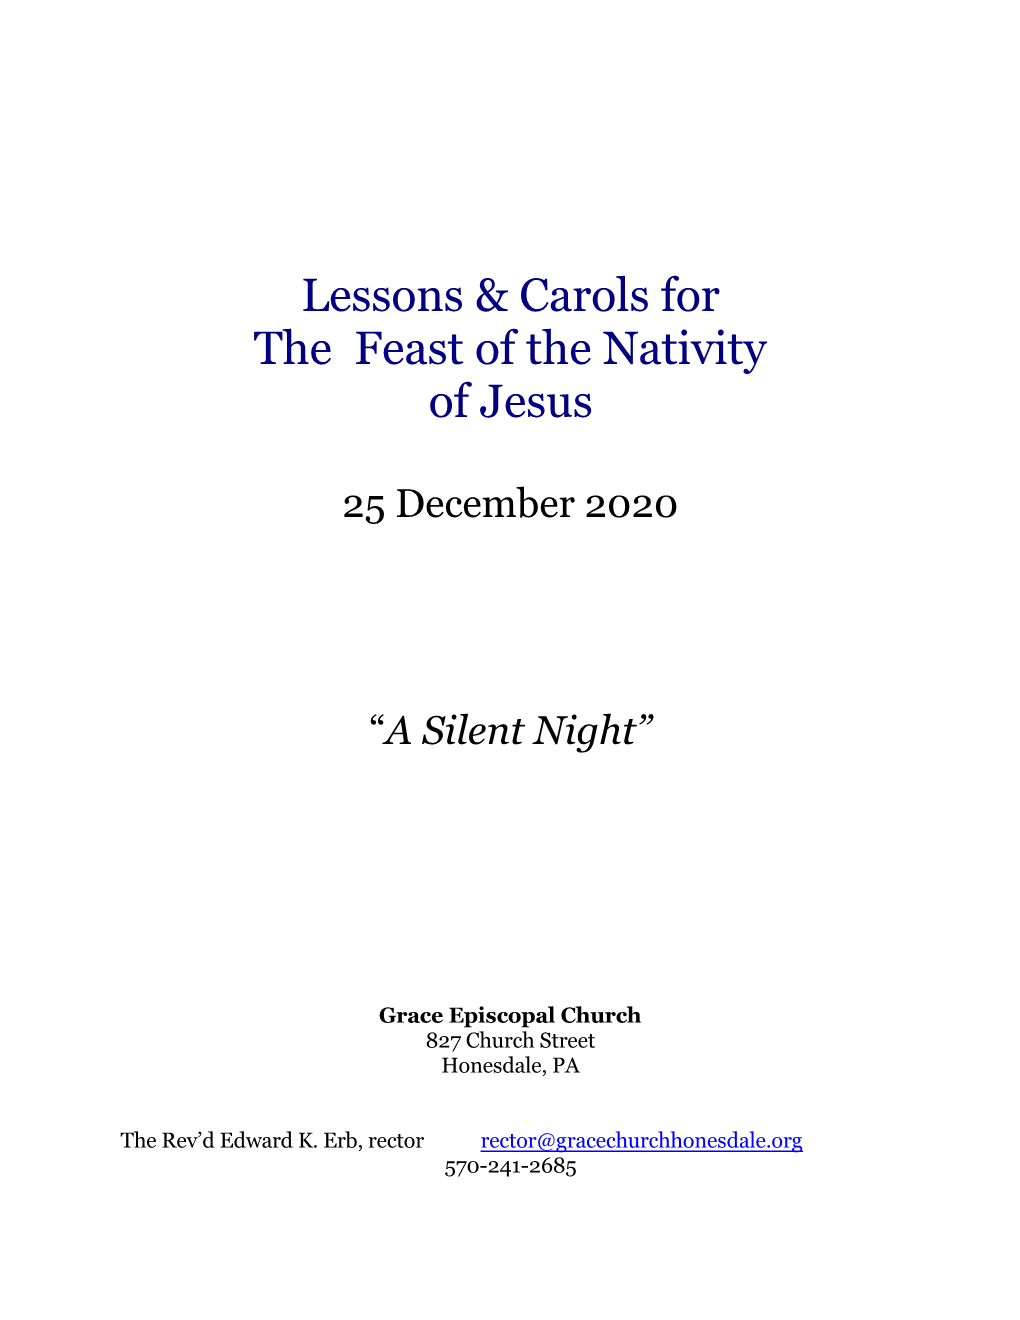 Lessons & Carols for the Feast of the Nativity of Jesus